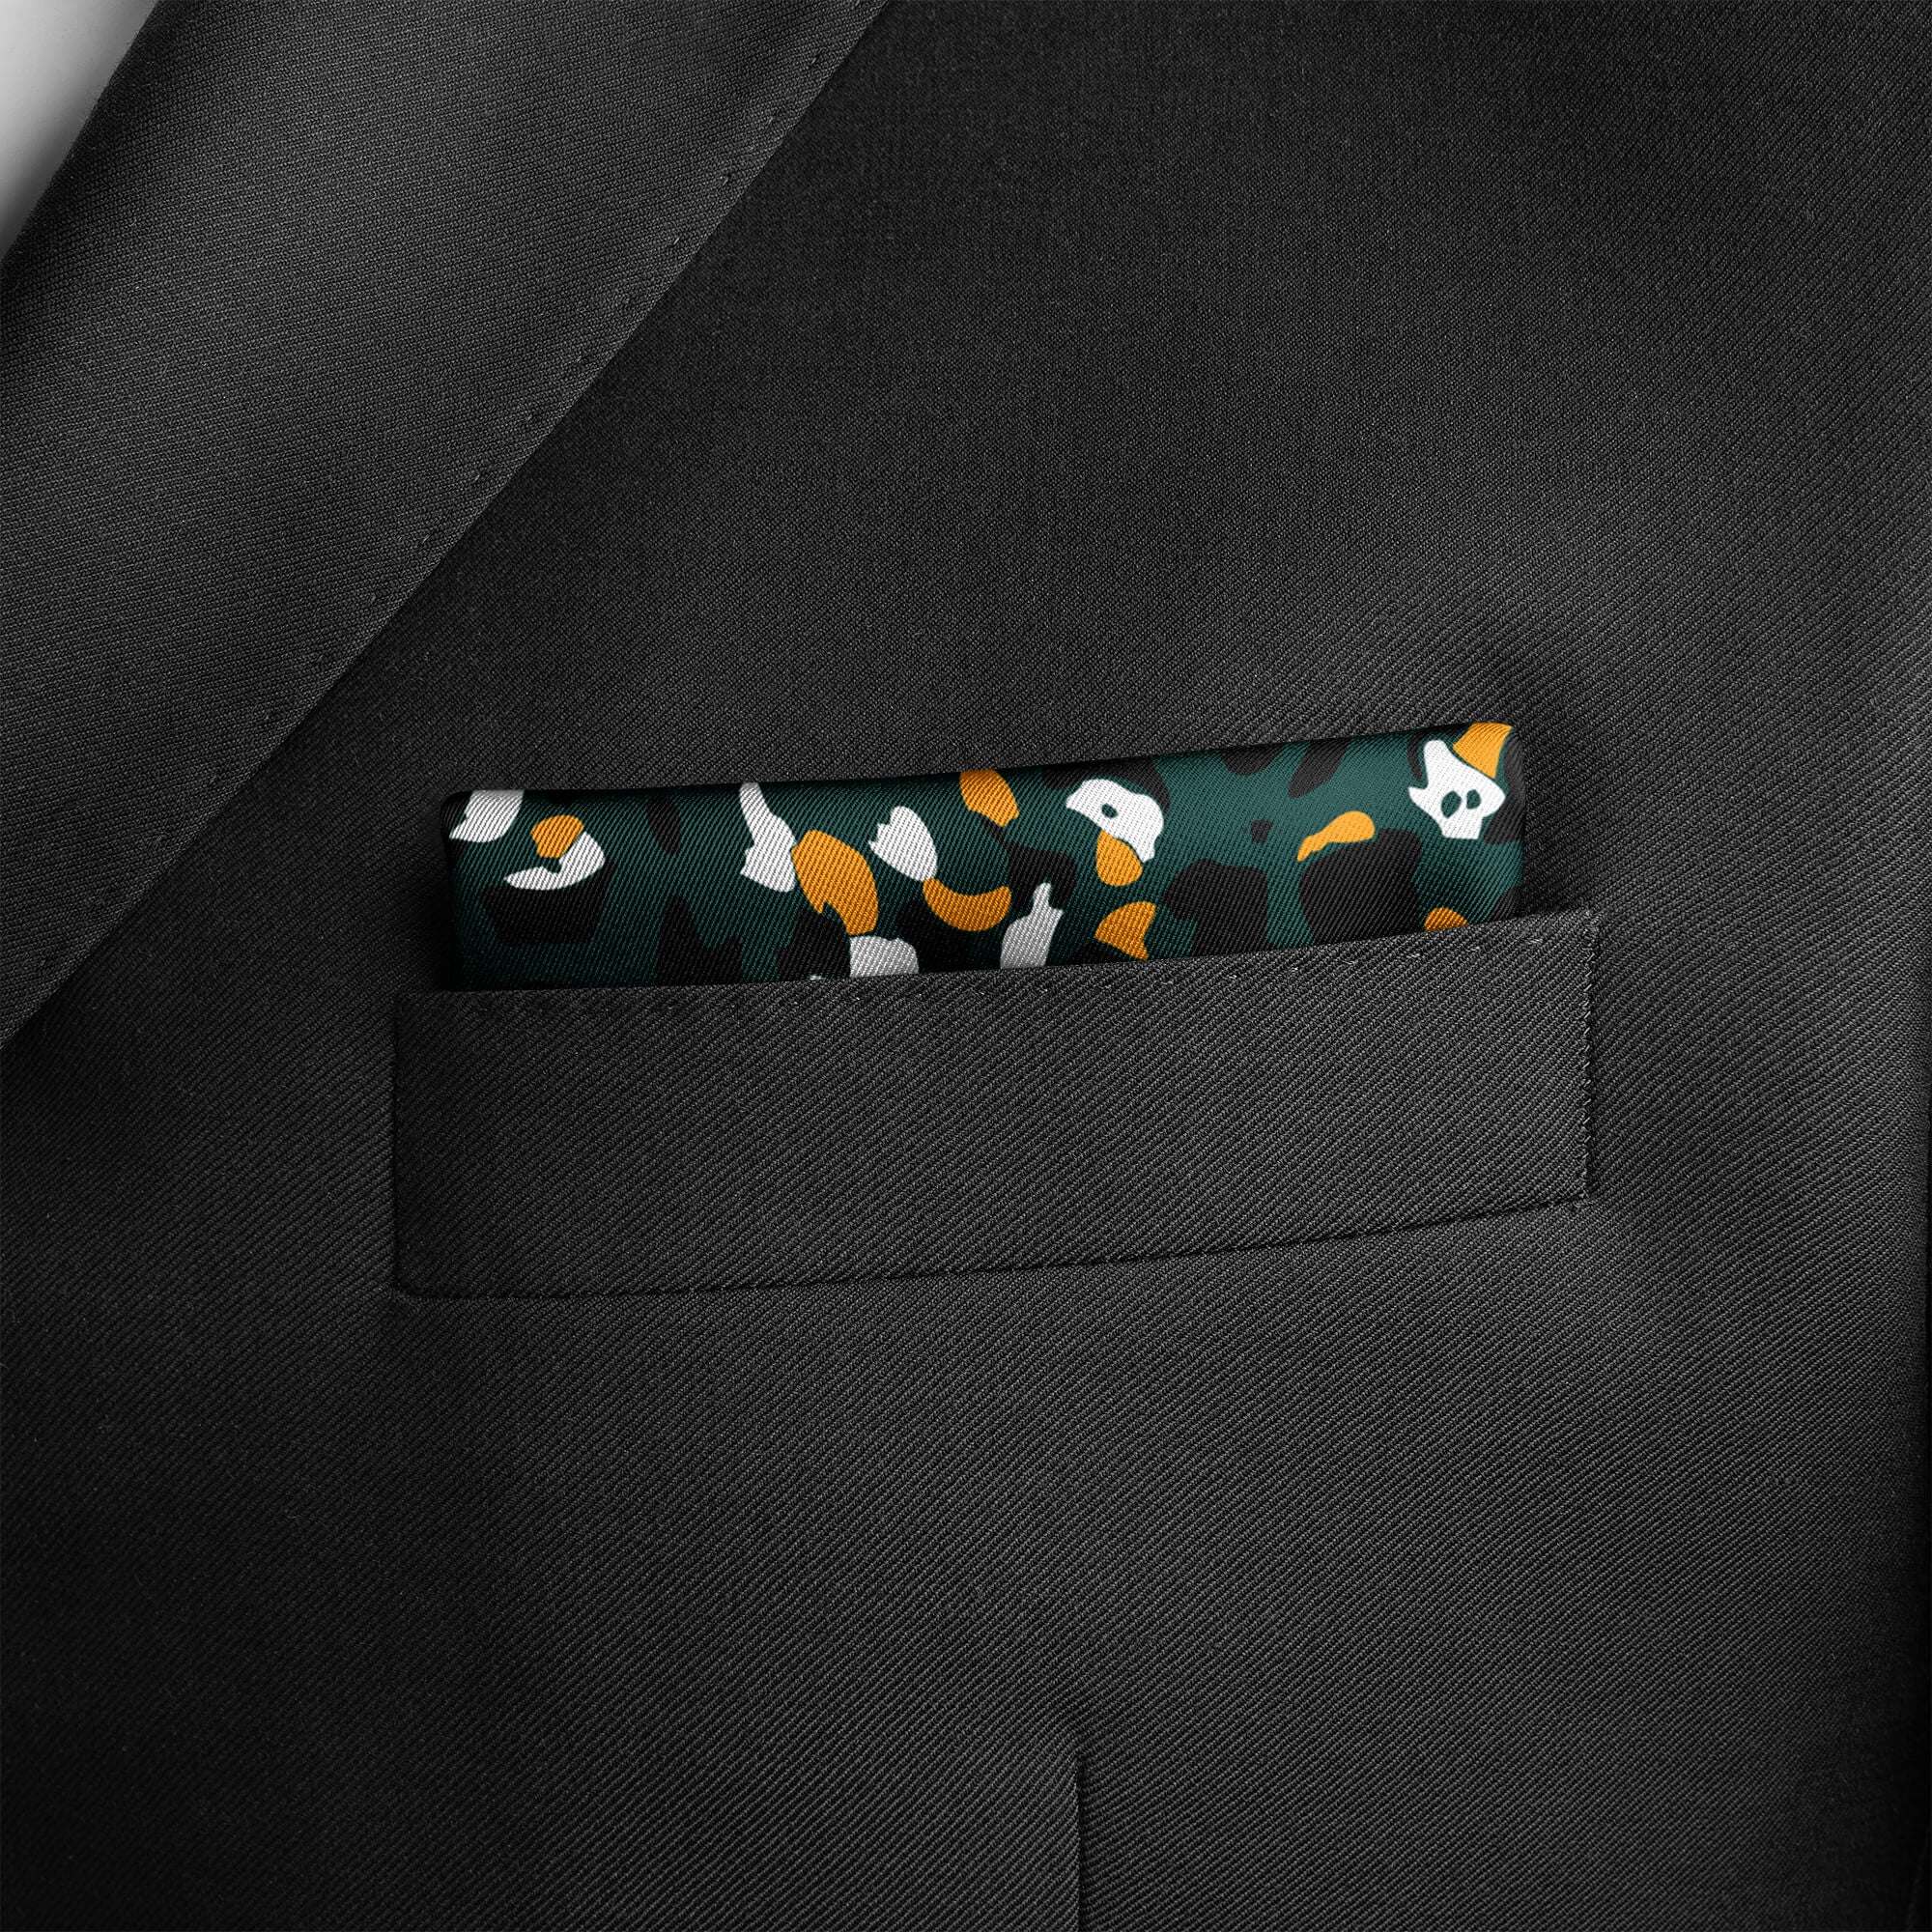 THE ARMY GREEN SILK POCKET SQUARE